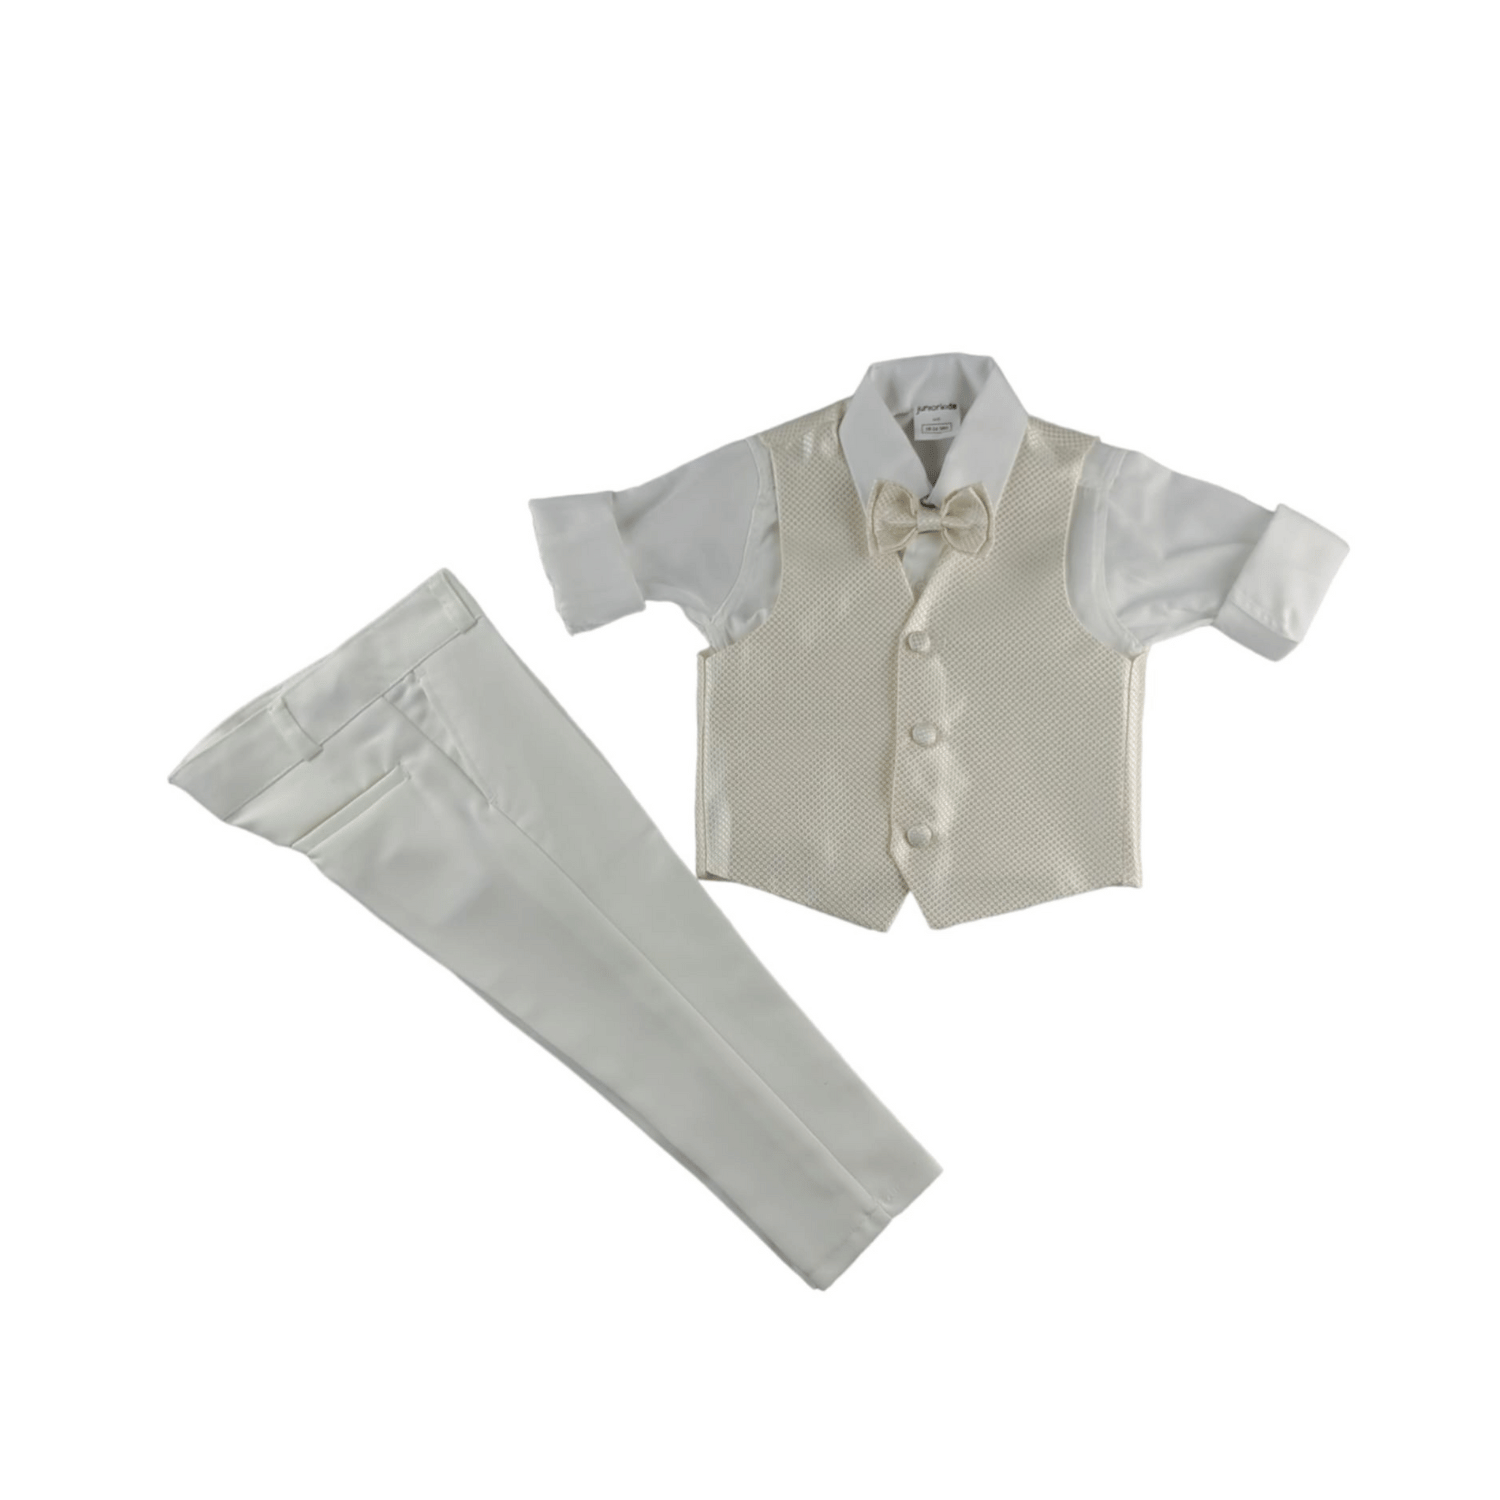 Damiano's Baptism Formal Boys Suit